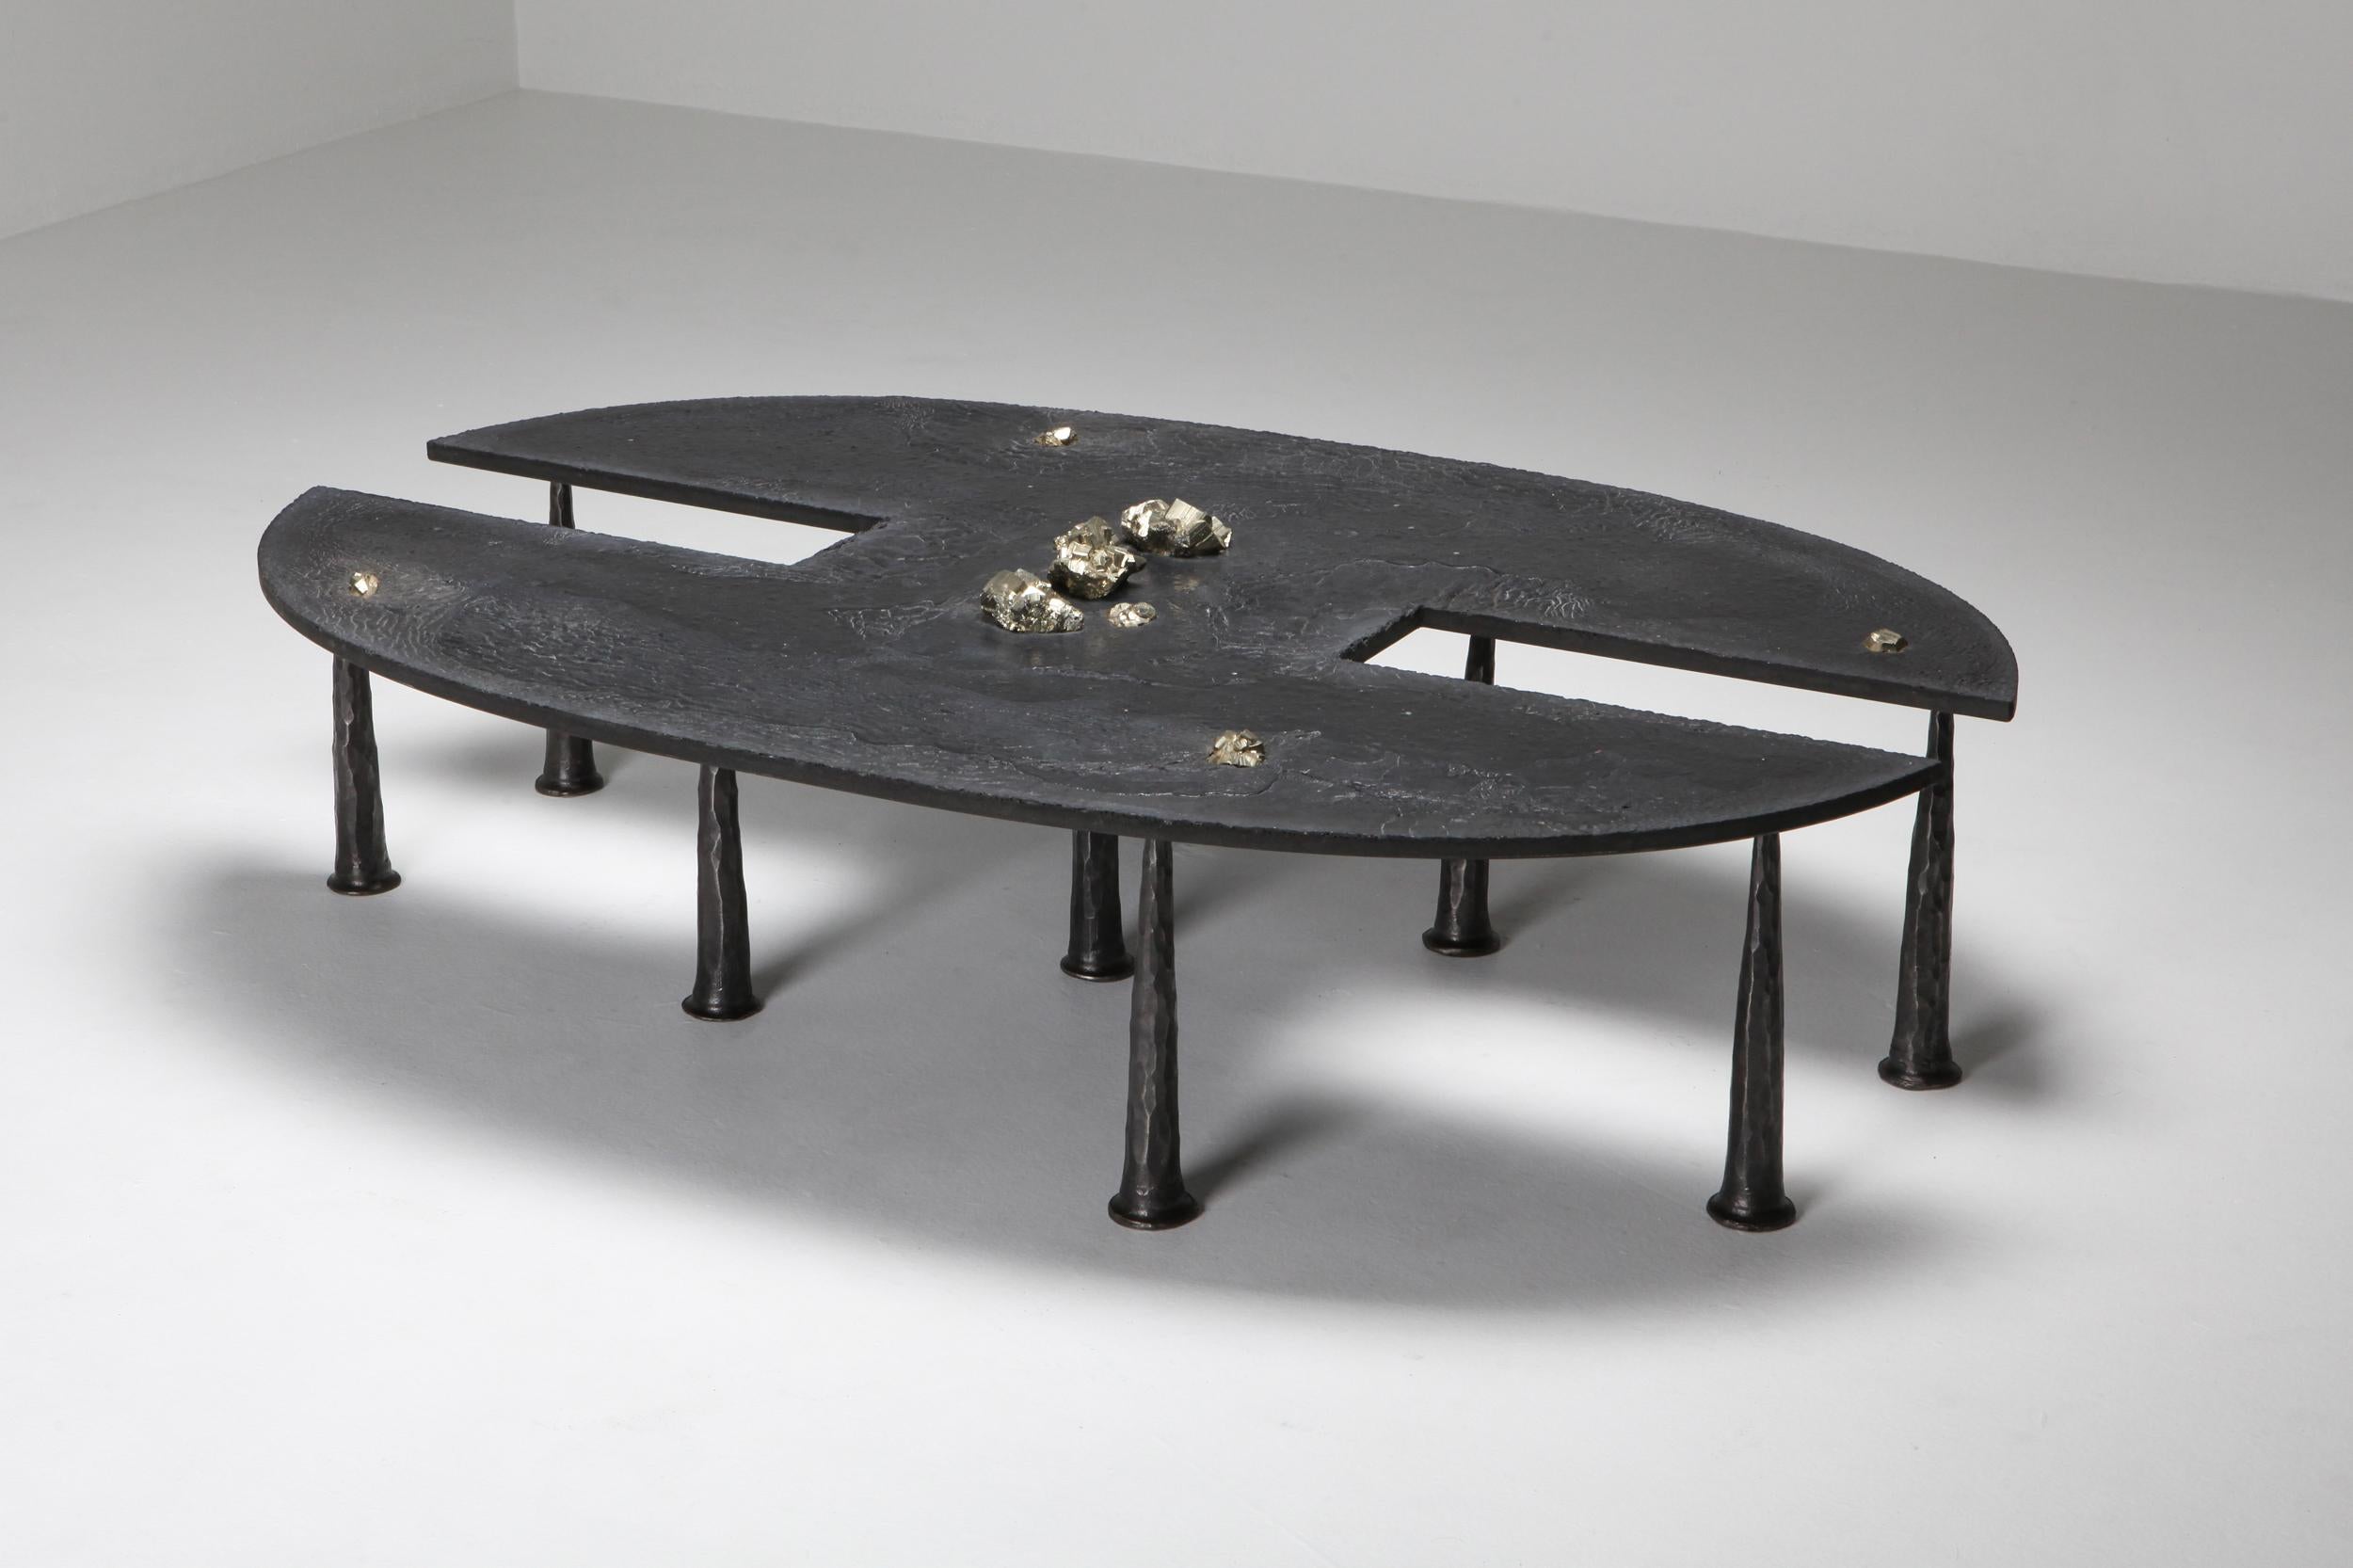 Brutalism, collectible design, Thomas Serruys coffee table, 2019.

This unique piece is made out of steel and cement and has an Industrial and Brutalist approach.
Thomas Serruys, 1986, is Belgian designer born in Bruges. Fascinated by machinery,